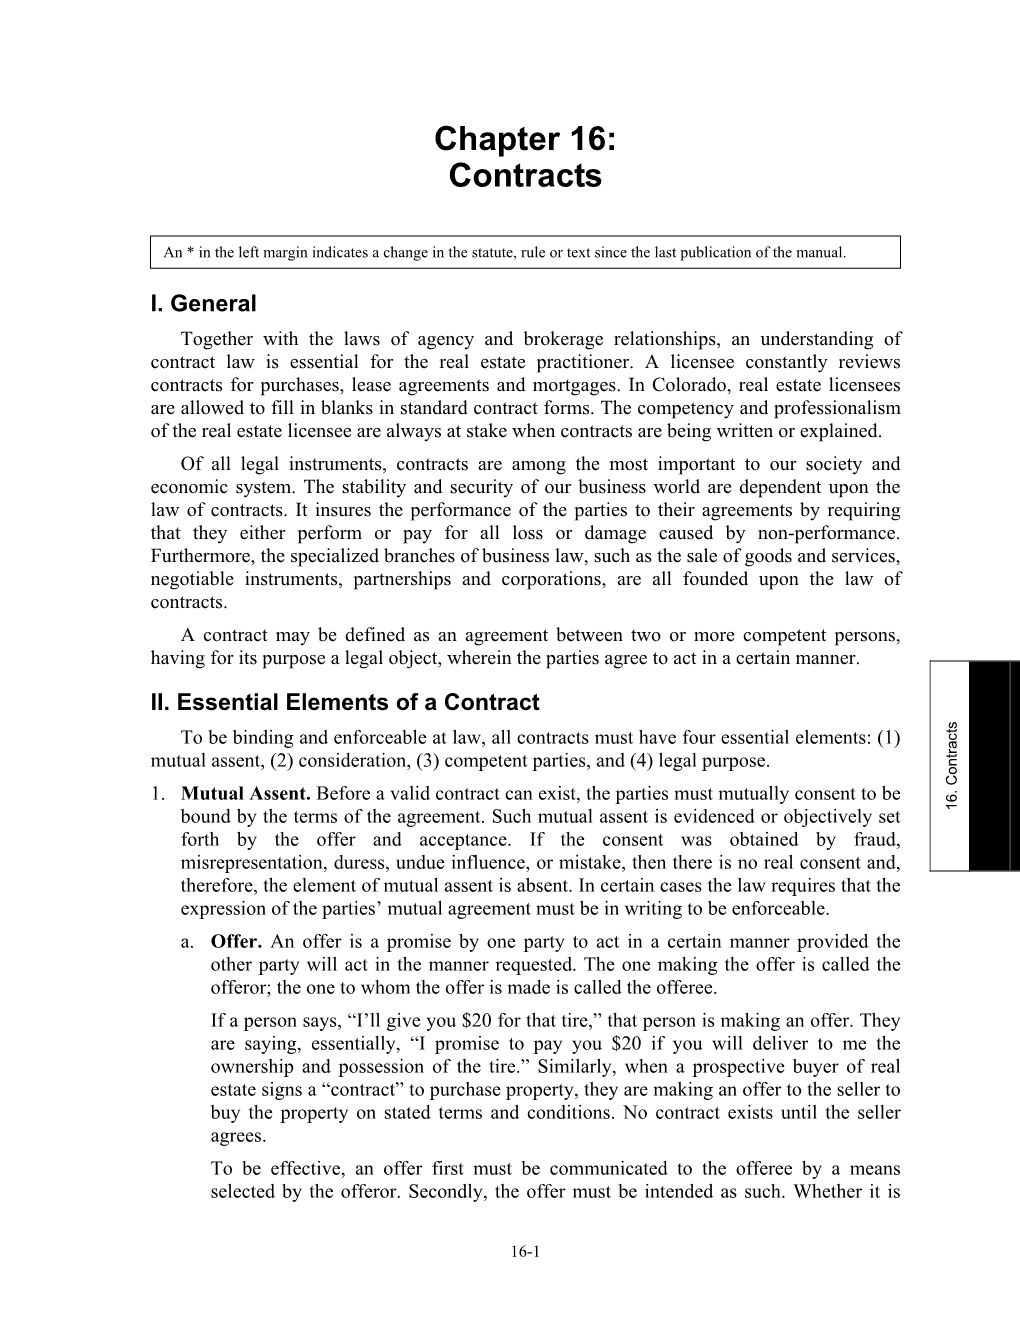 Chapter 16: Contracts